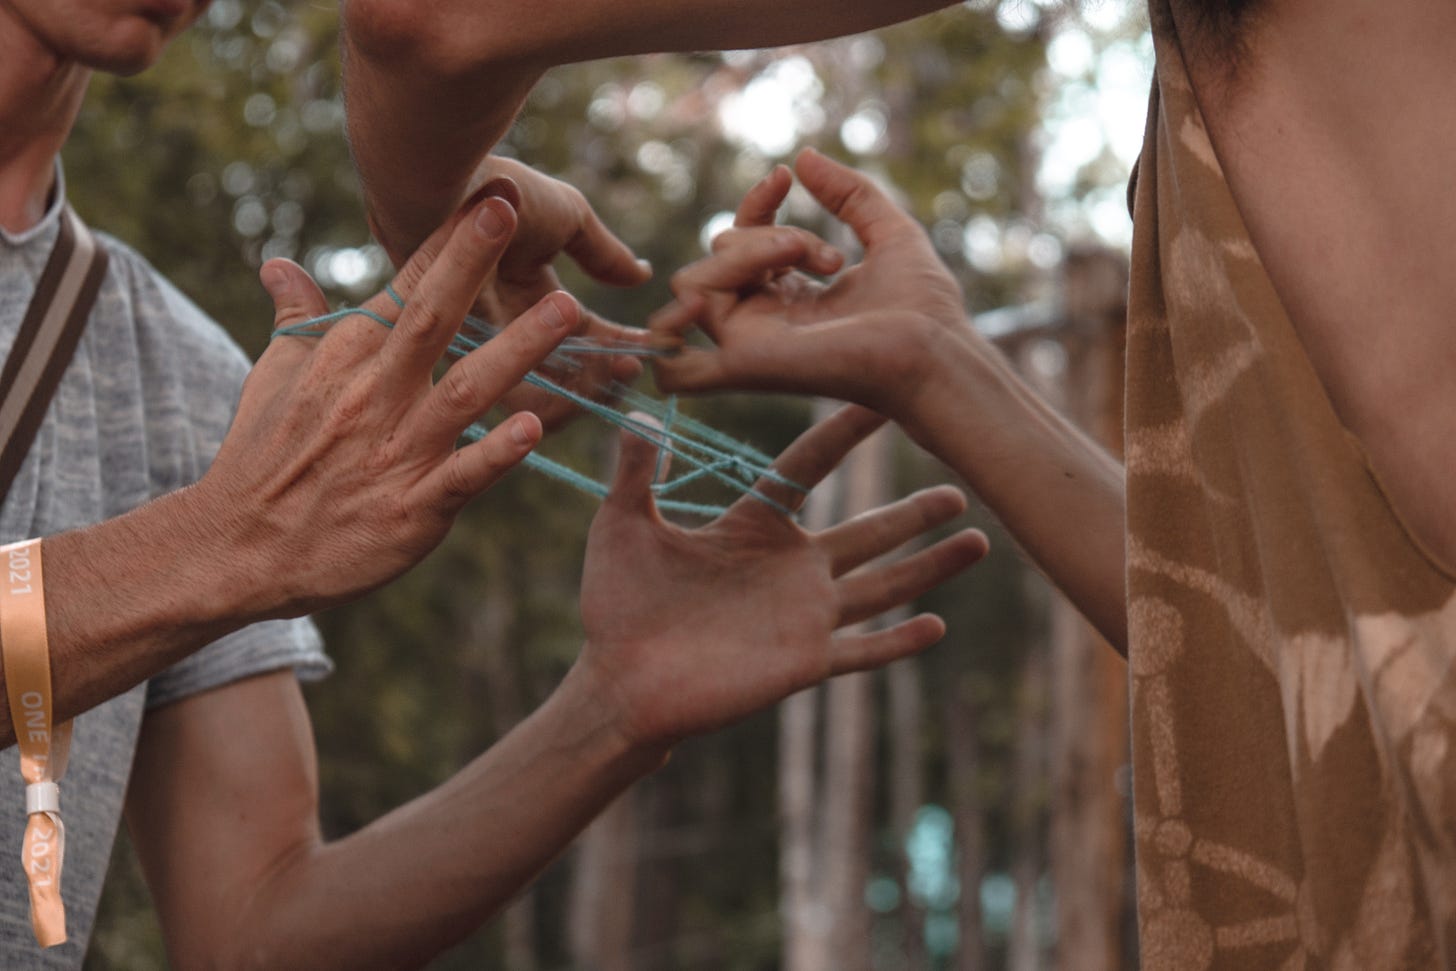 hands of two people building a cat's cradle together